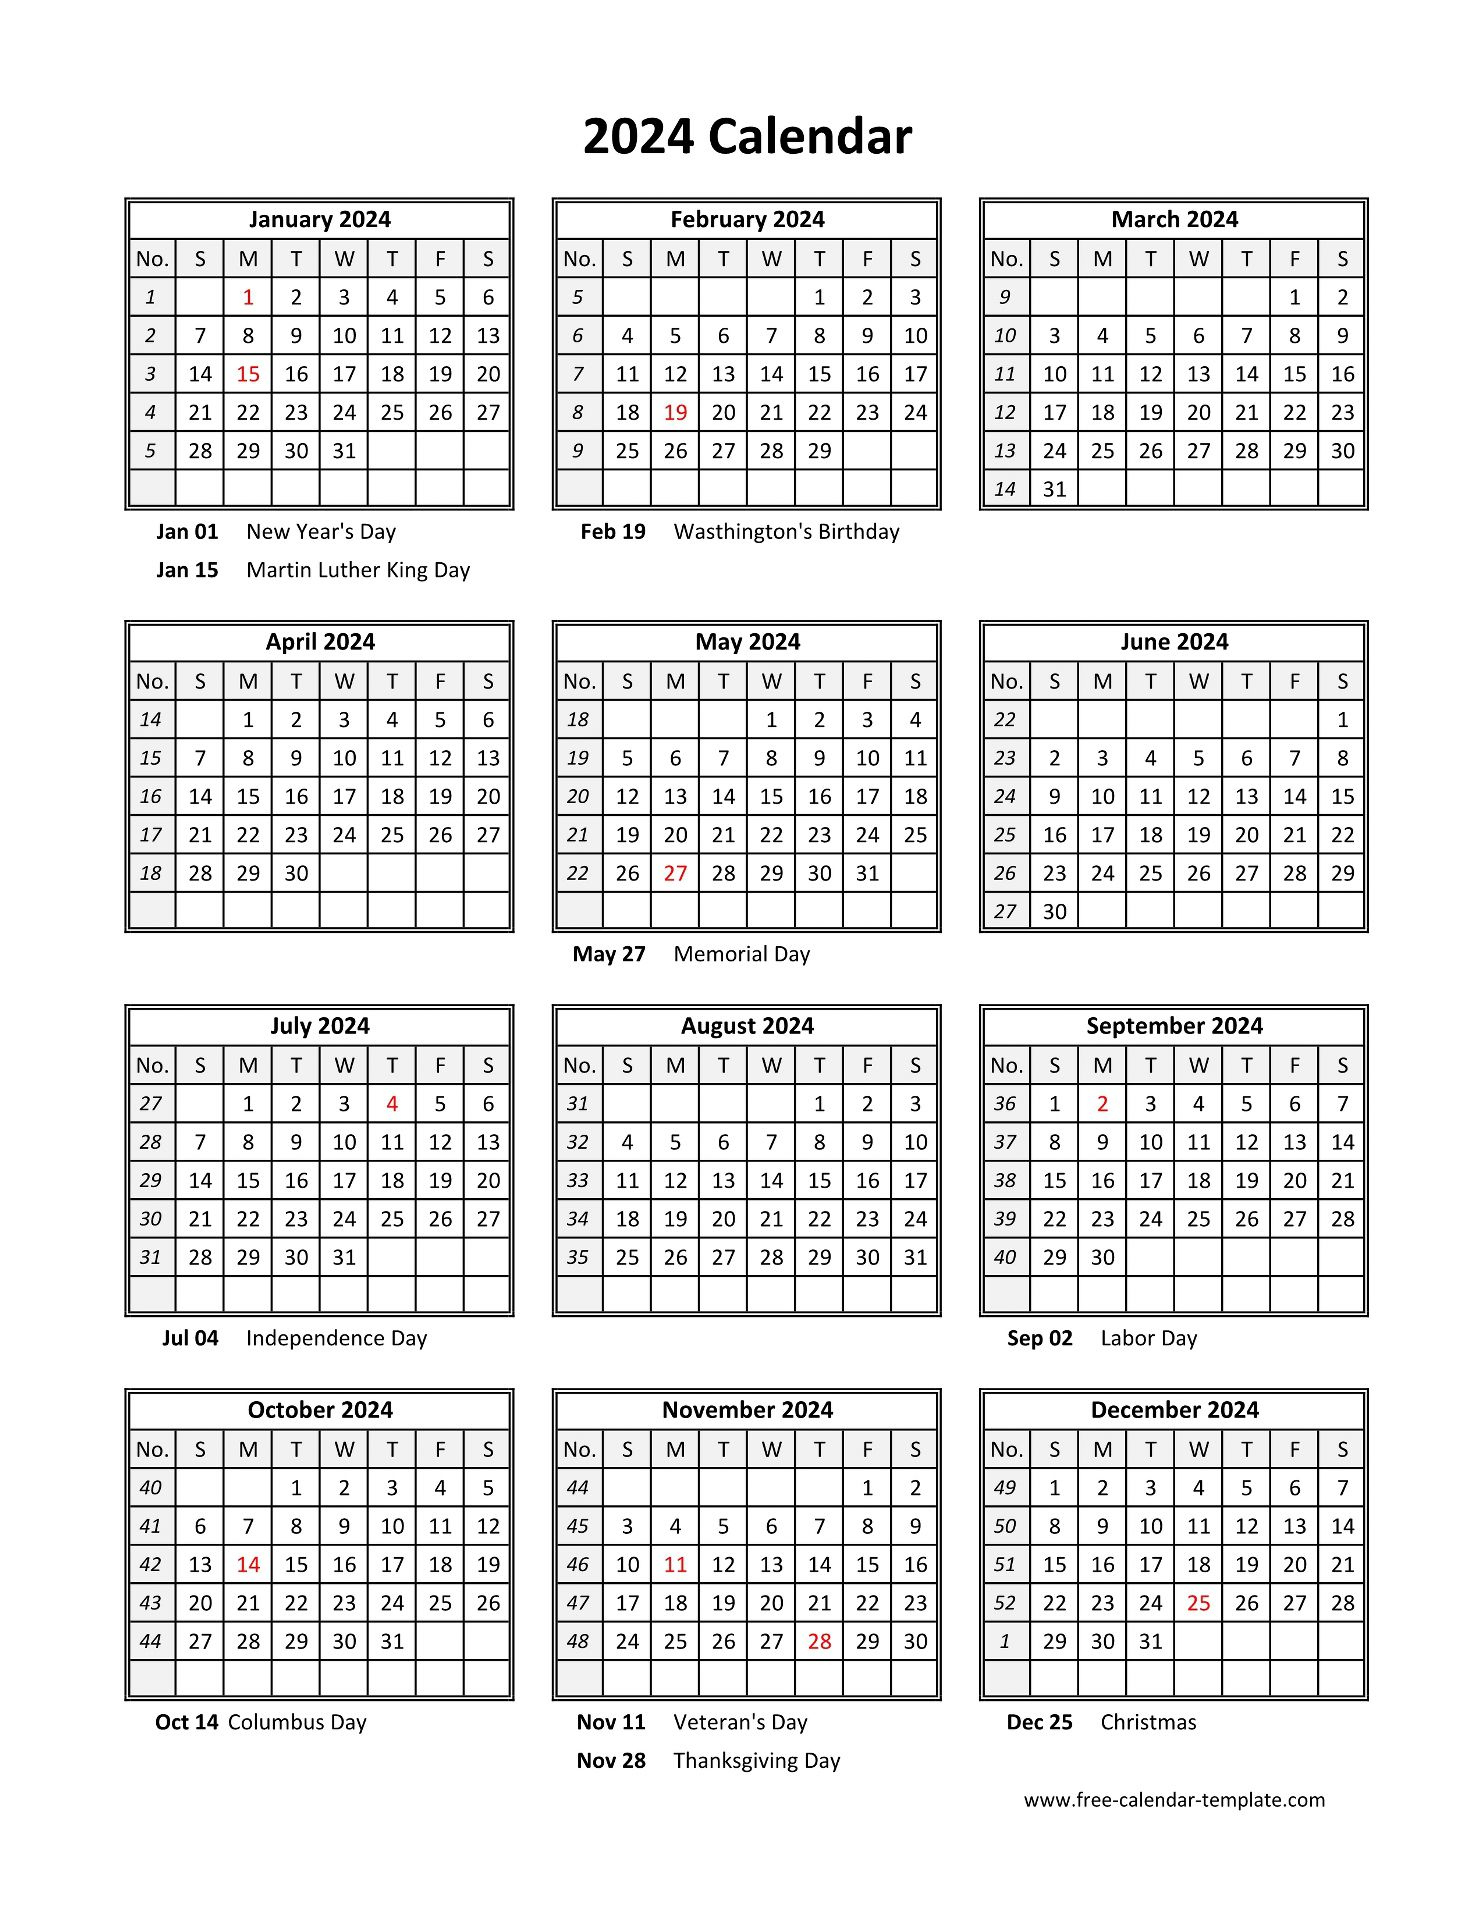 Yearly Printable Calendar 2024 With Holidays | Free-Calendar | Free Vertical Printable Calendar 2024